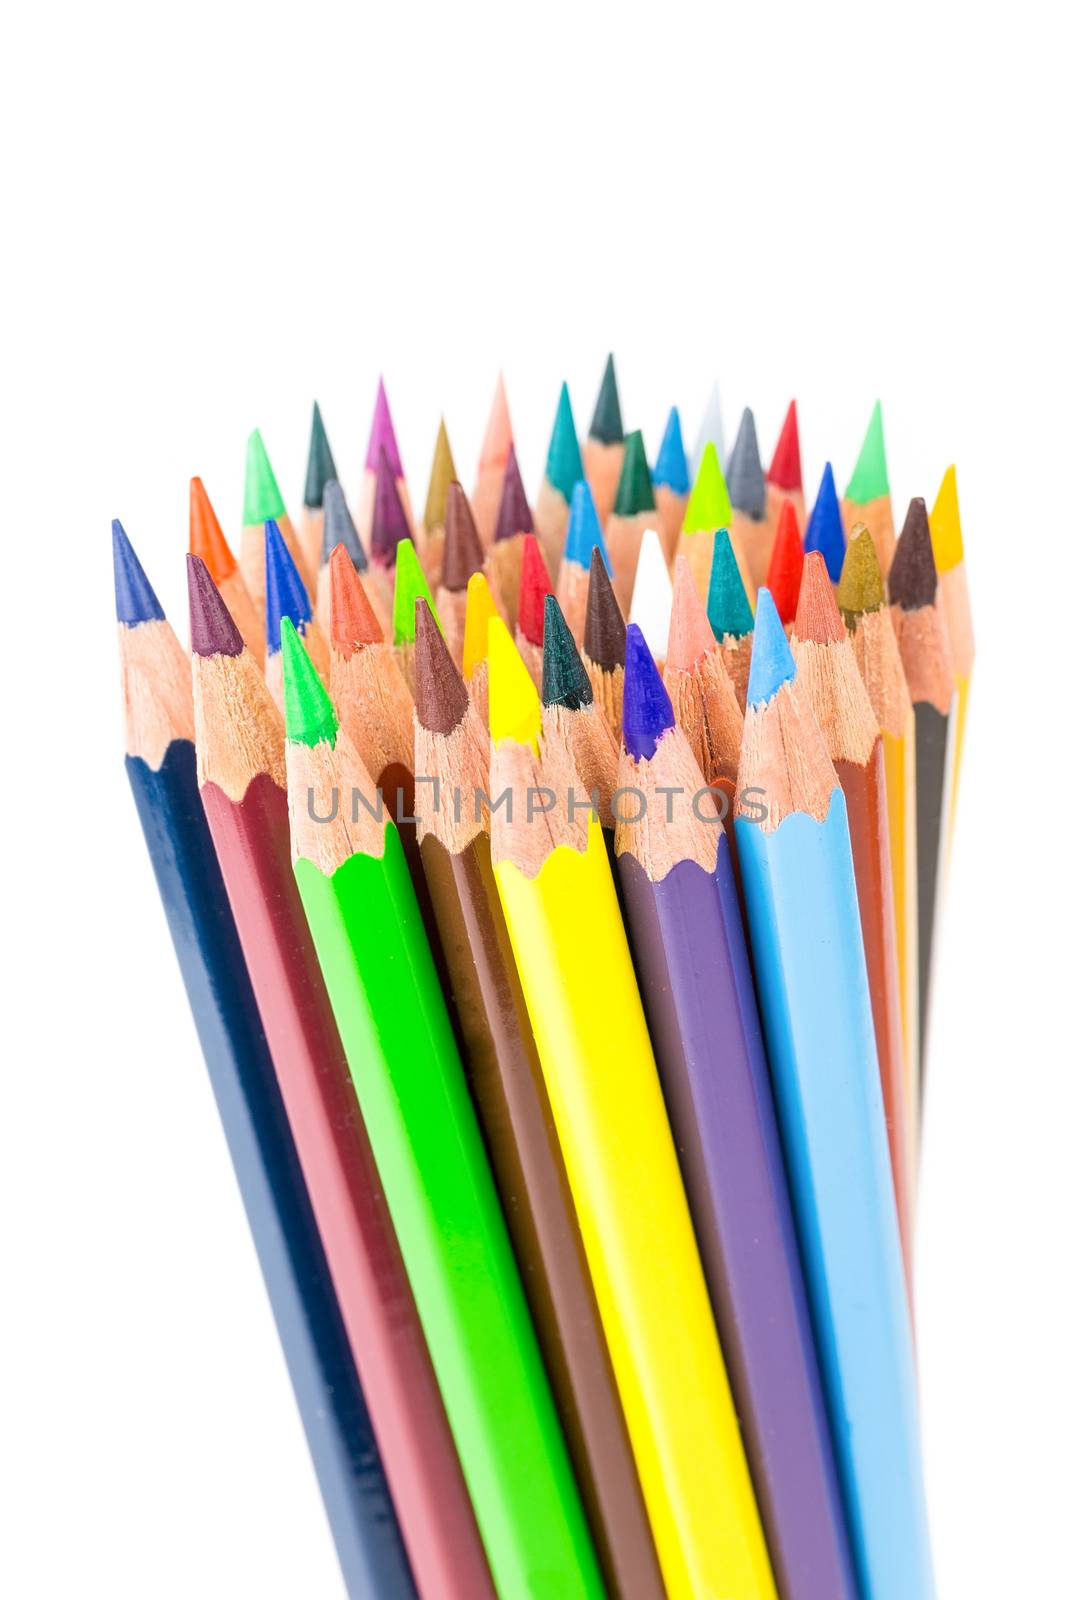 Various colered crayons standing upright isolated on white background